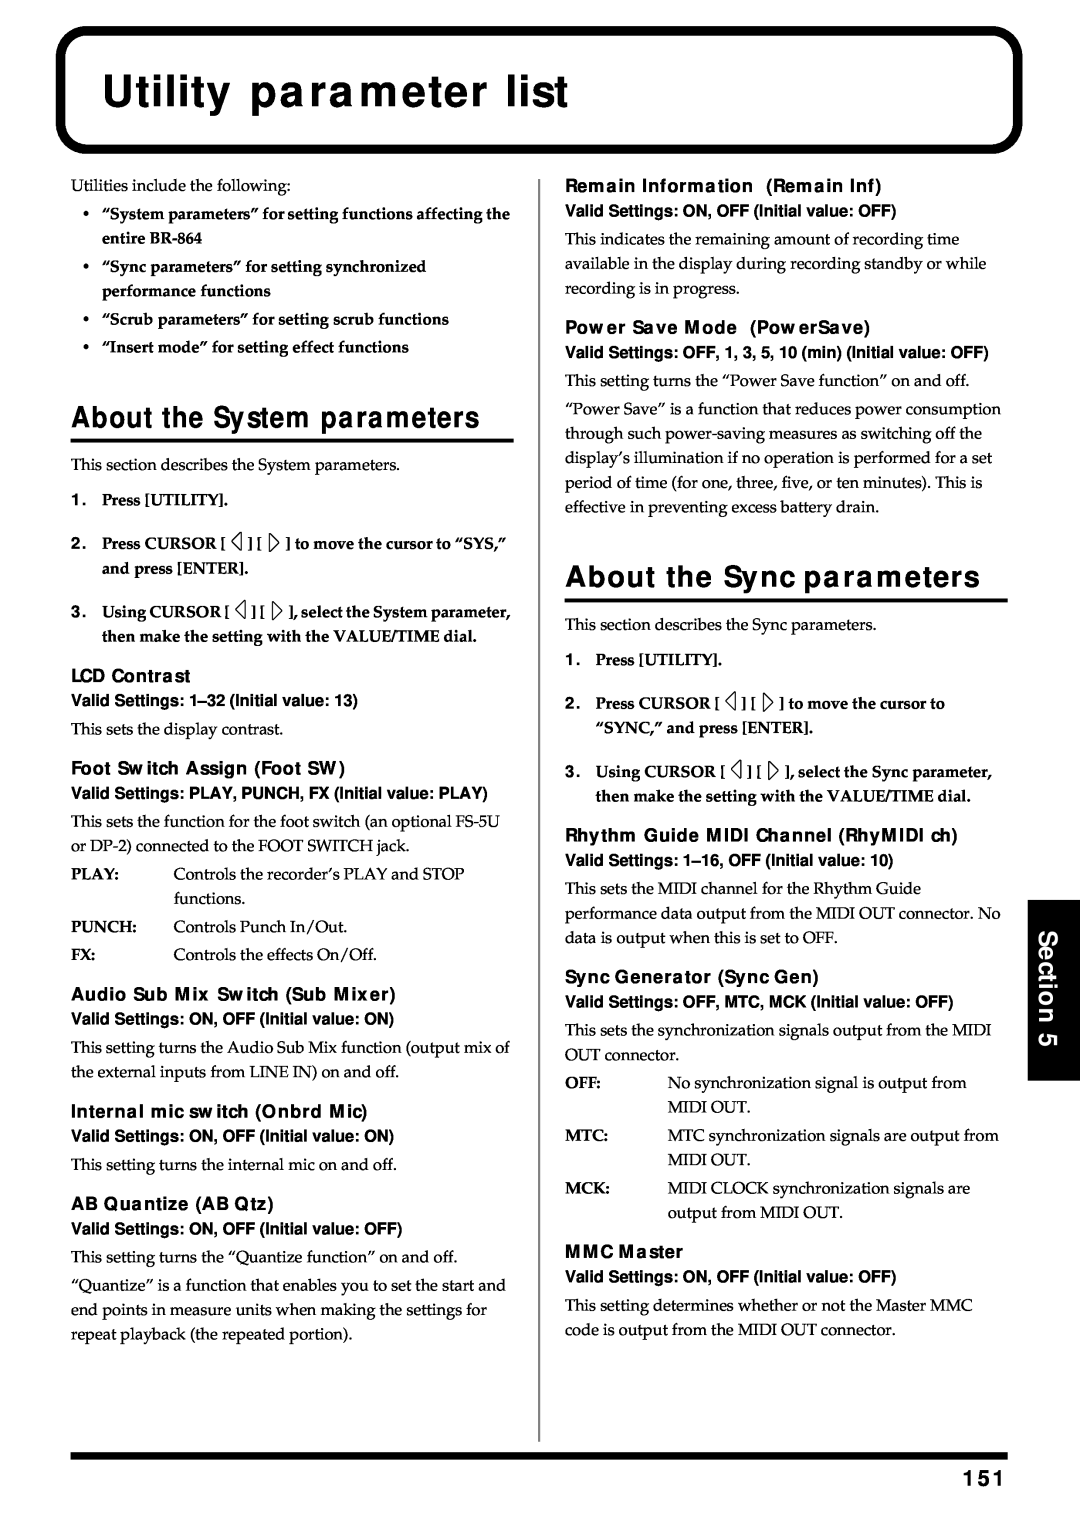 Roland BR-864 owner manual Utility parameter list, About the System parameters, About the Sync parameters, Section 